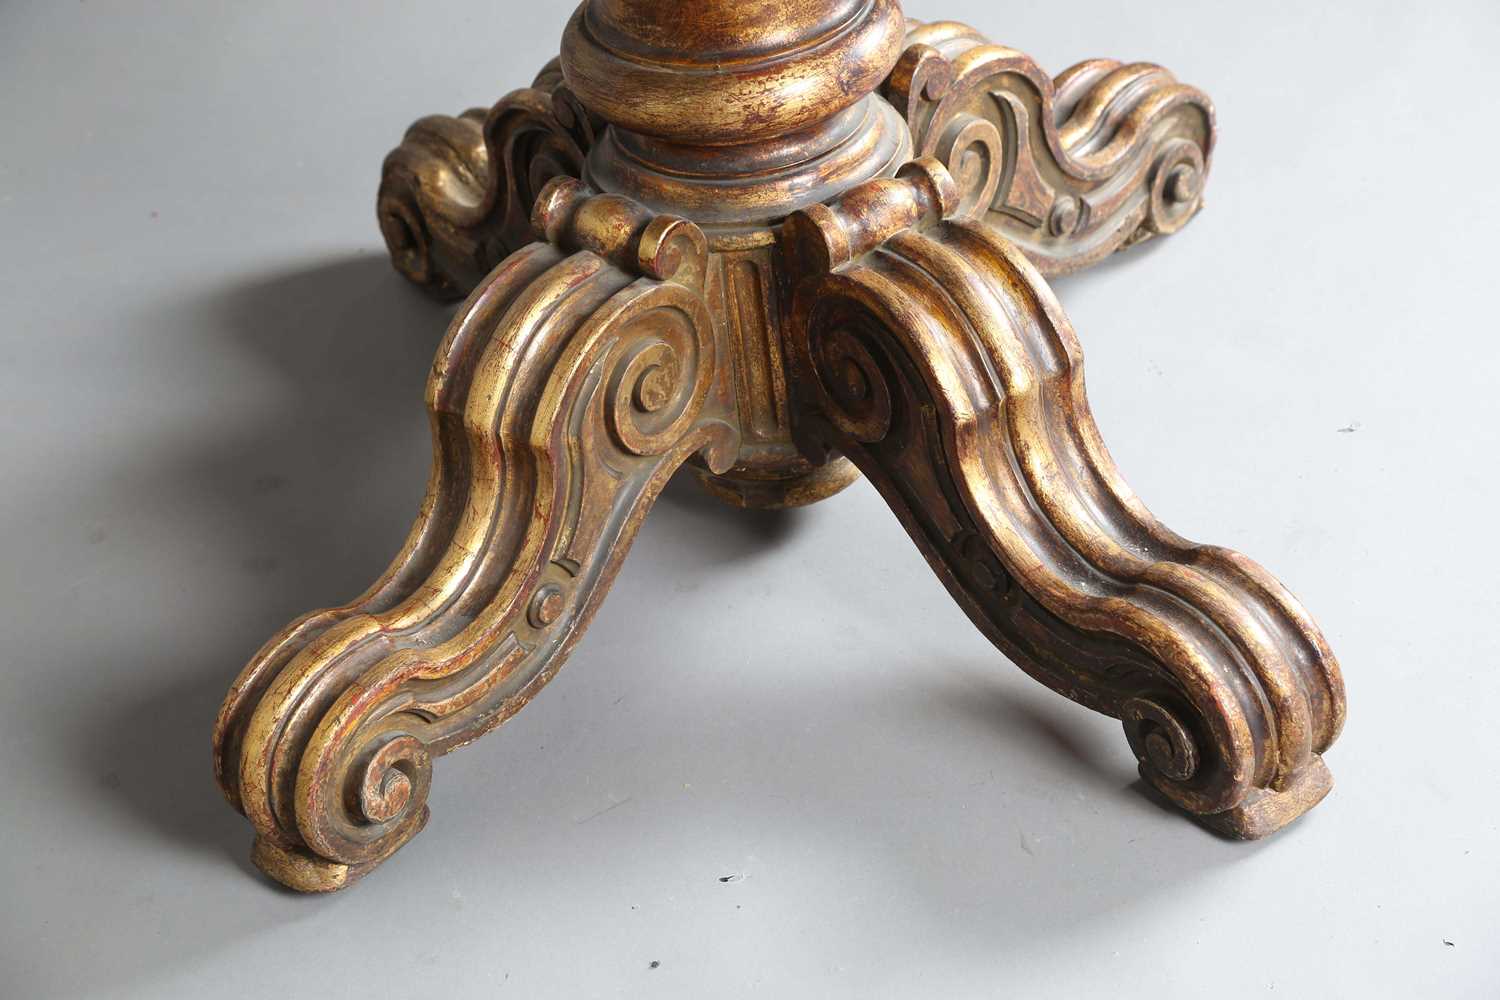 A 19th century giltwood table base with a later removable top, the base carved with scrolling legs - Image 7 of 10